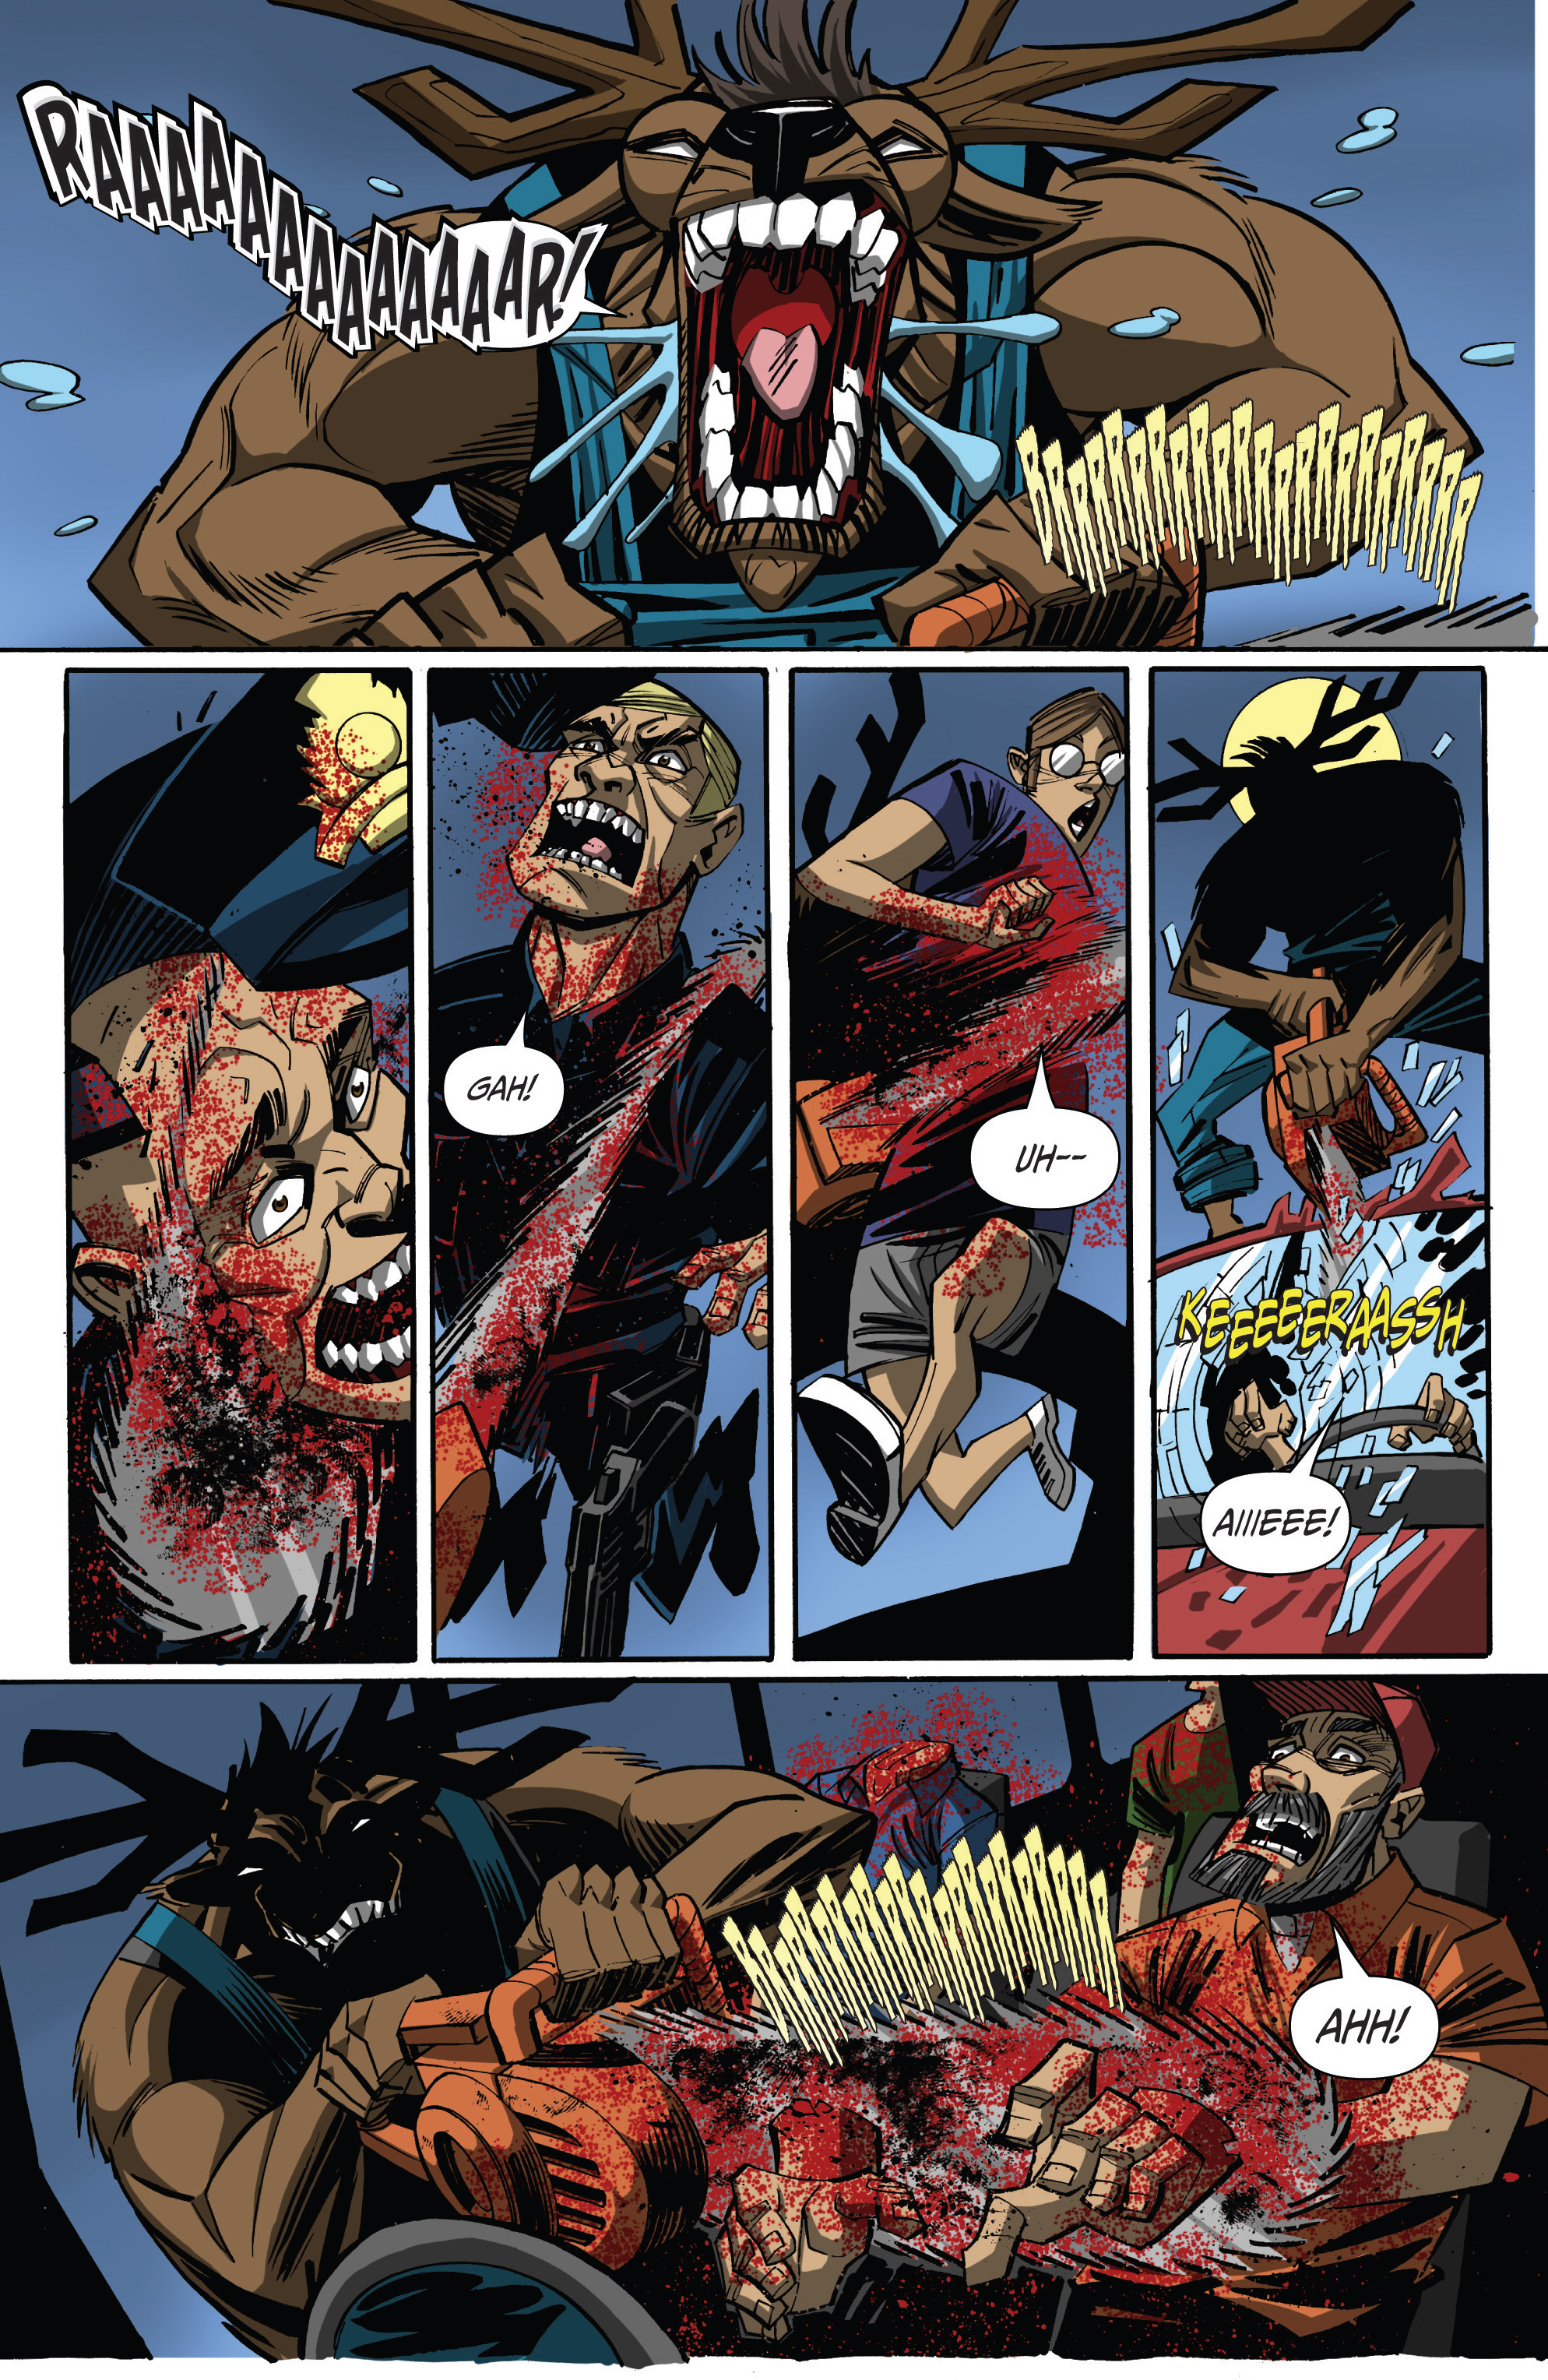 Read online Chainsaw Reindeer comic -  Issue # Full - 12